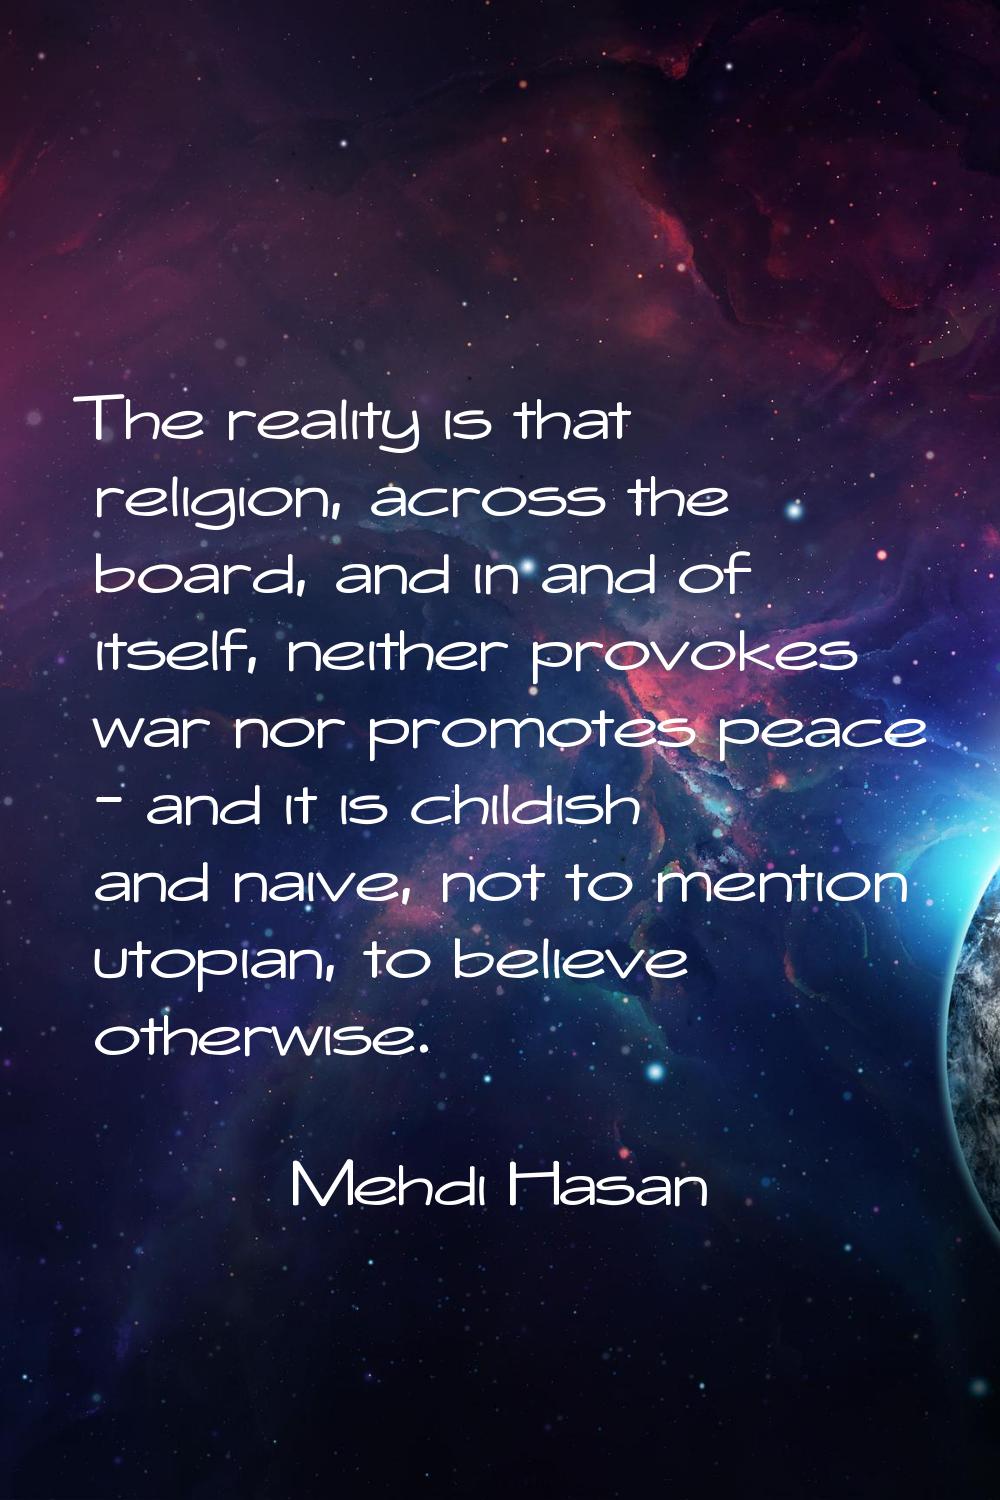 The reality is that religion, across the board, and in and of itself, neither provokes war nor prom